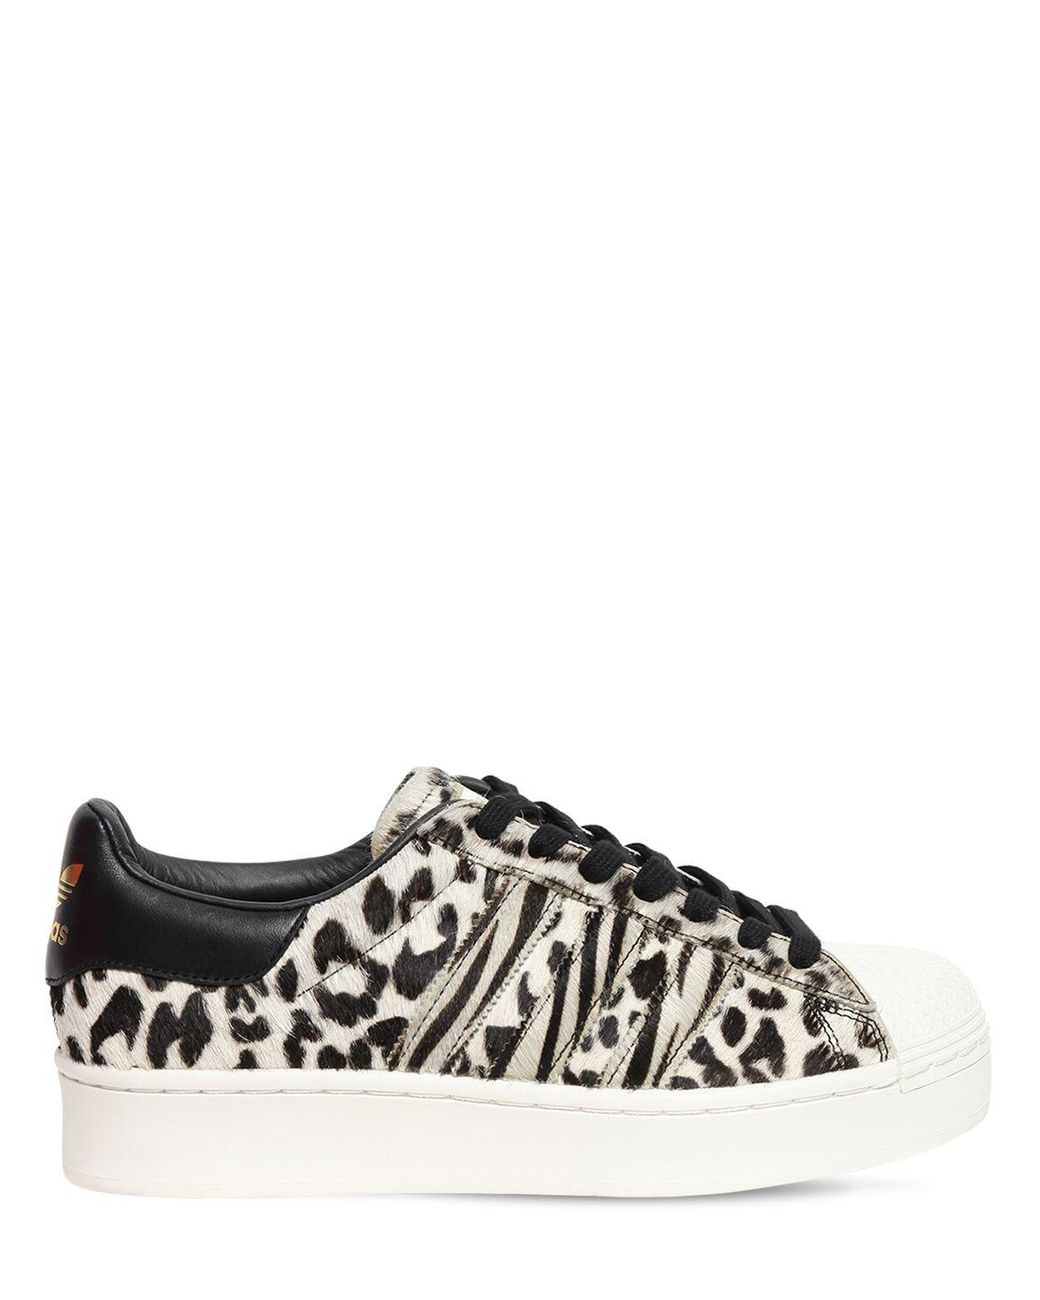 adidas Originals Leather Superstar Bold Sneakers In Animal Print in ...